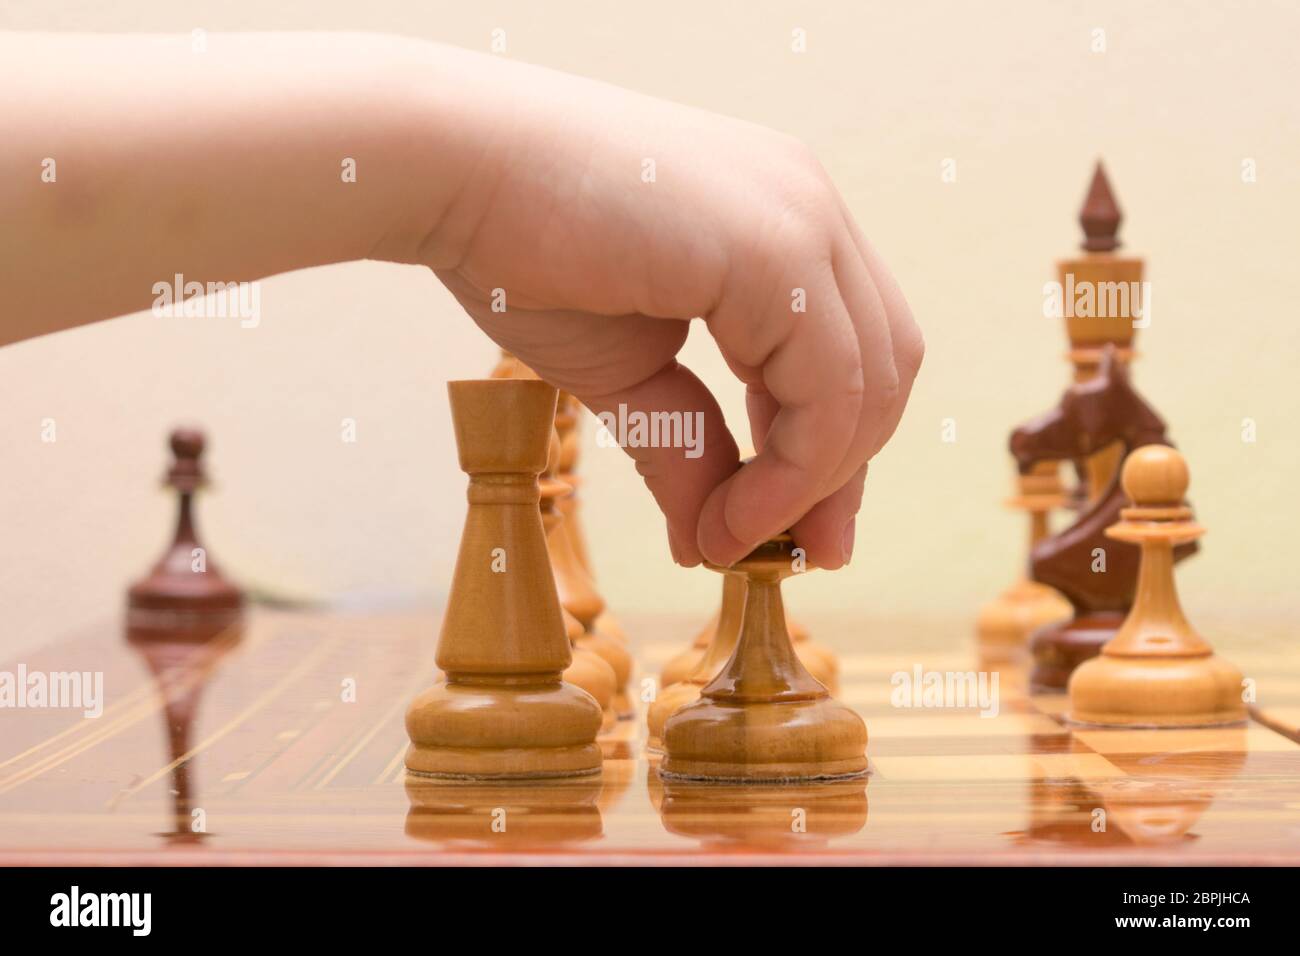 the children's hand puts a chess figure on the game field Stock Photo